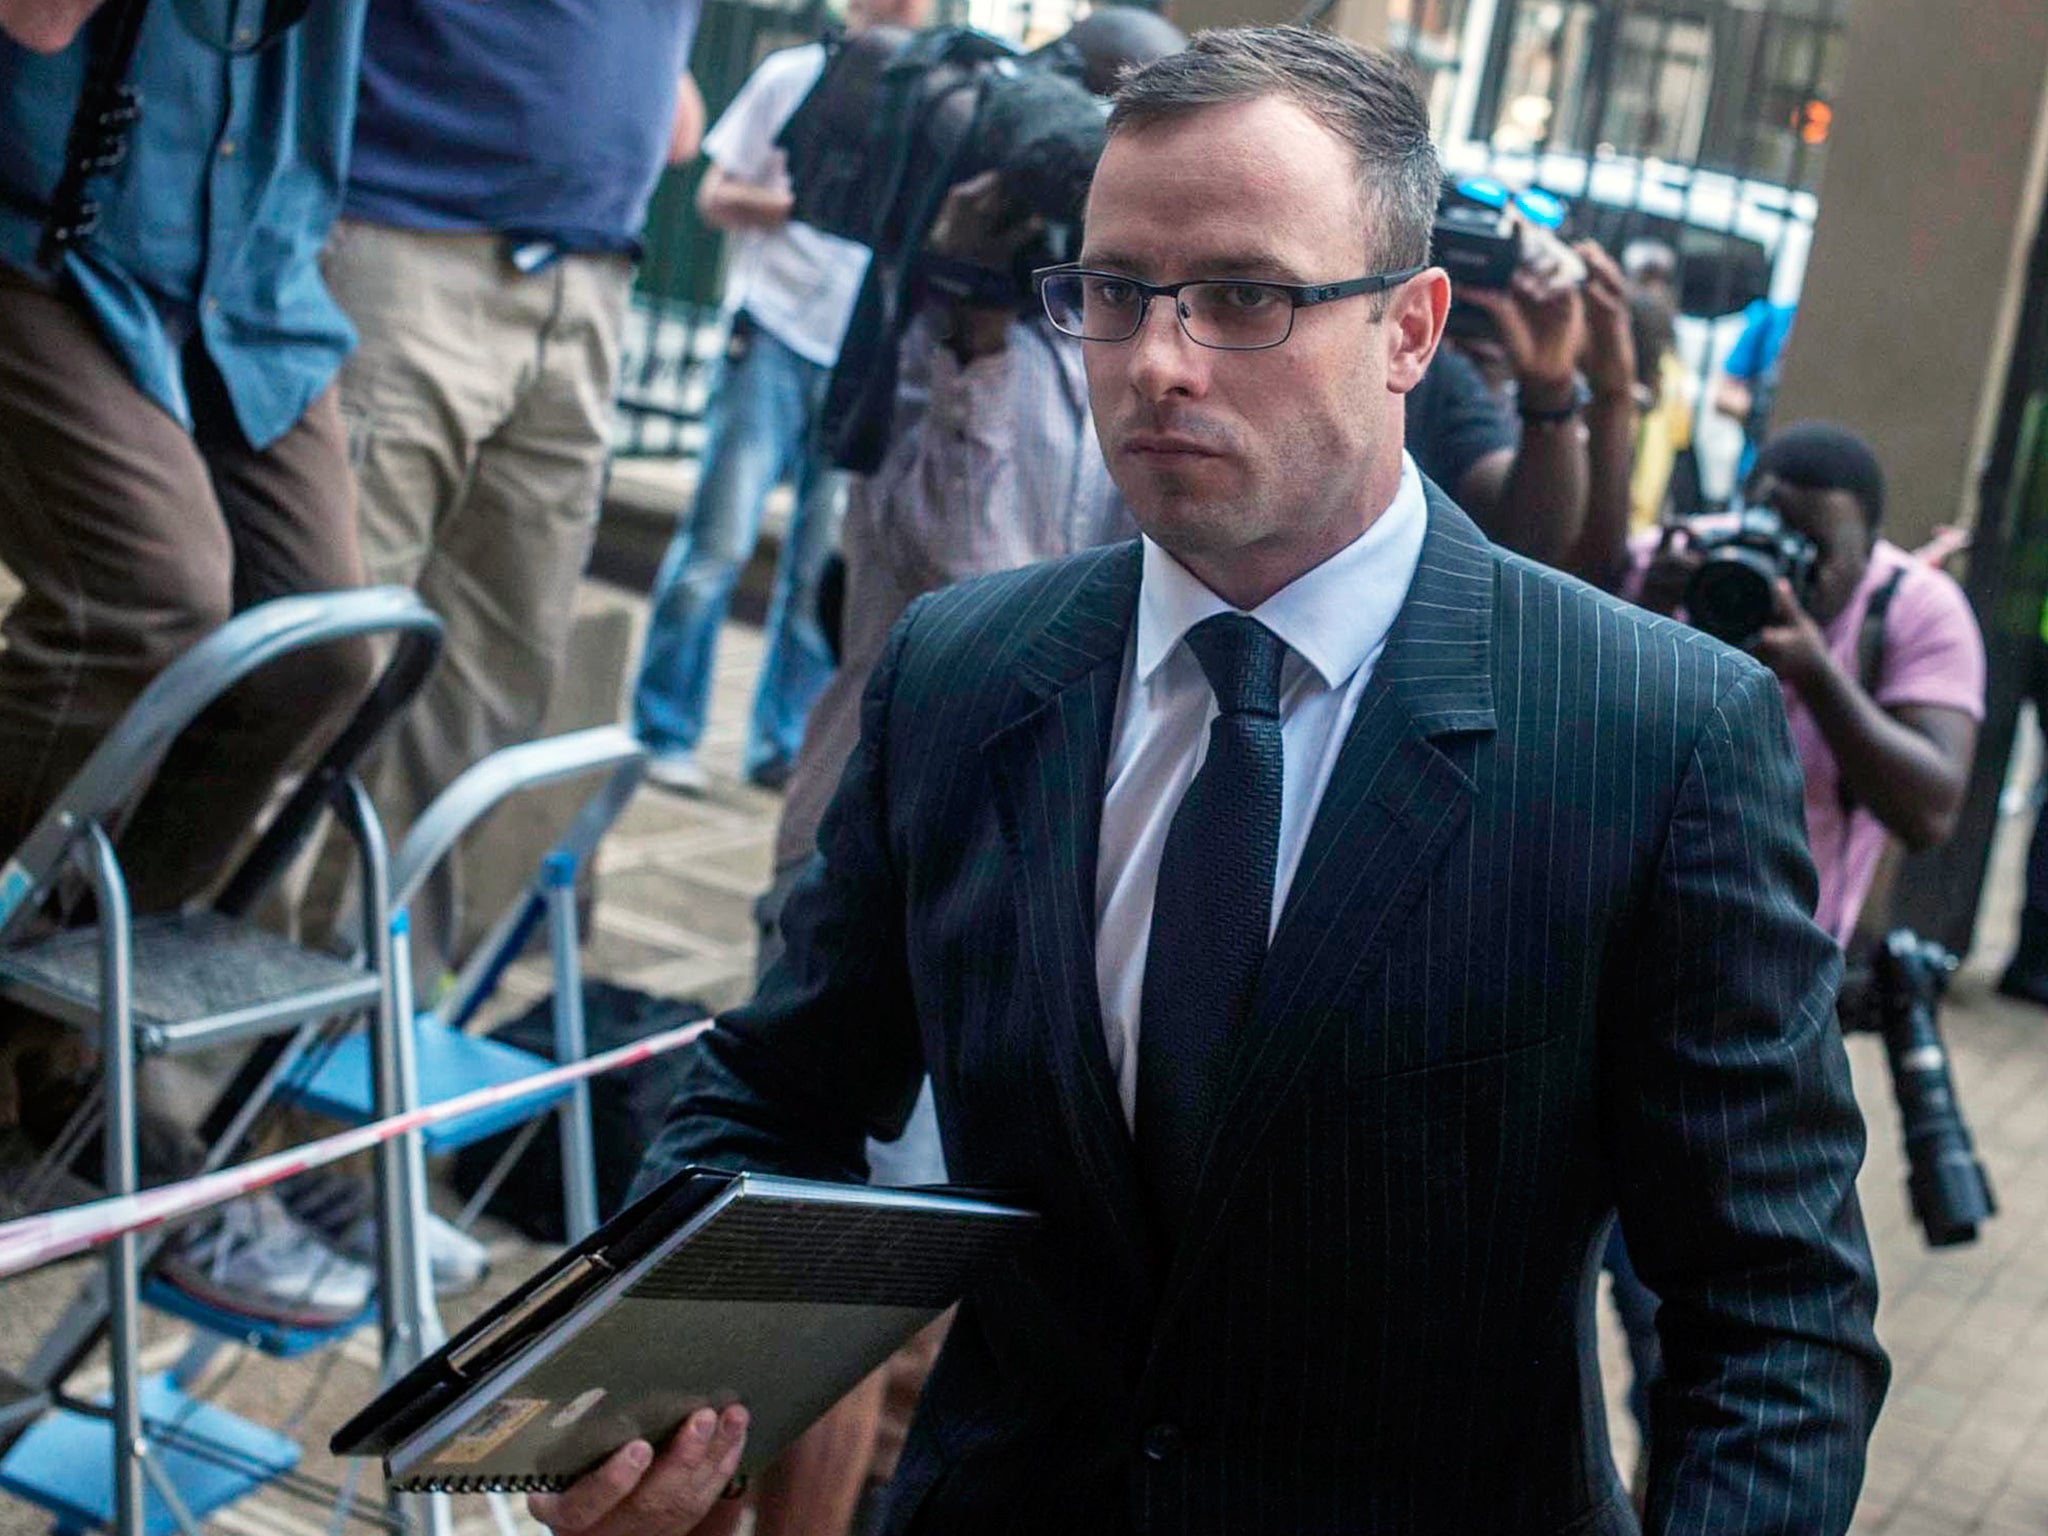 Oscar Pistorius arrives at the High Court for the second day of sentencing in his murder trial in Pretoria